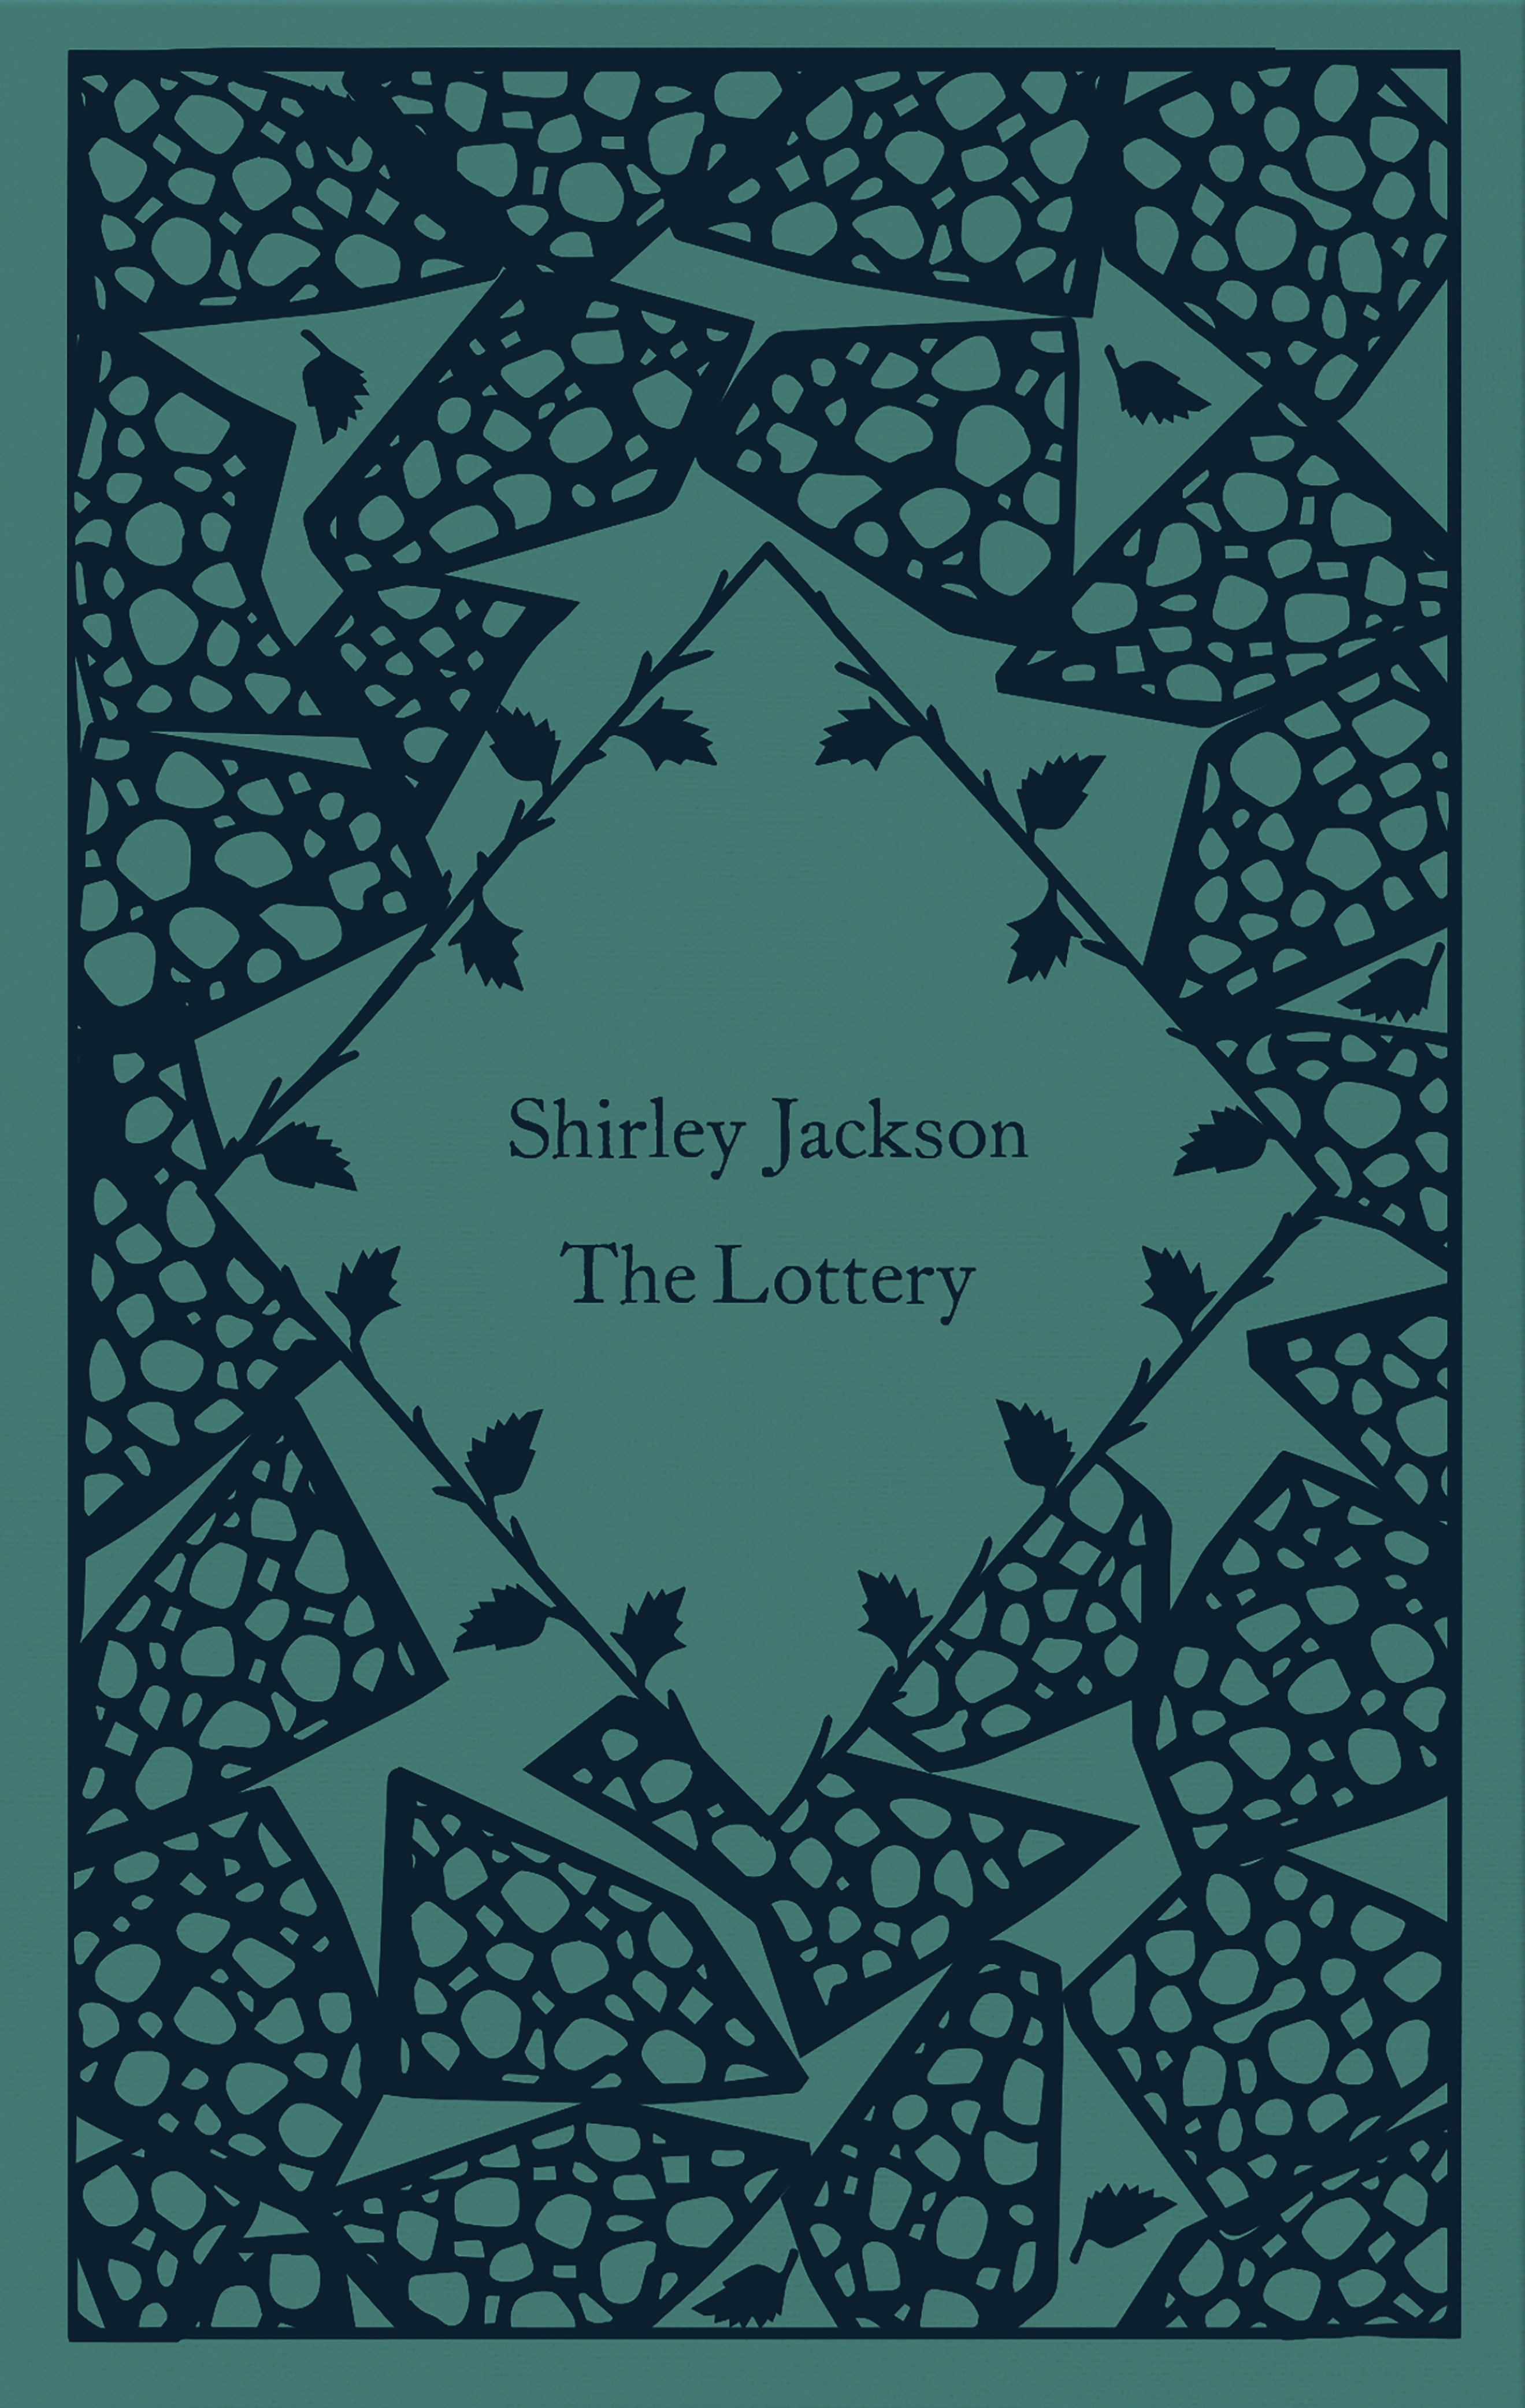 Book “The Lottery” by Shirley Jackson — August 25, 2022